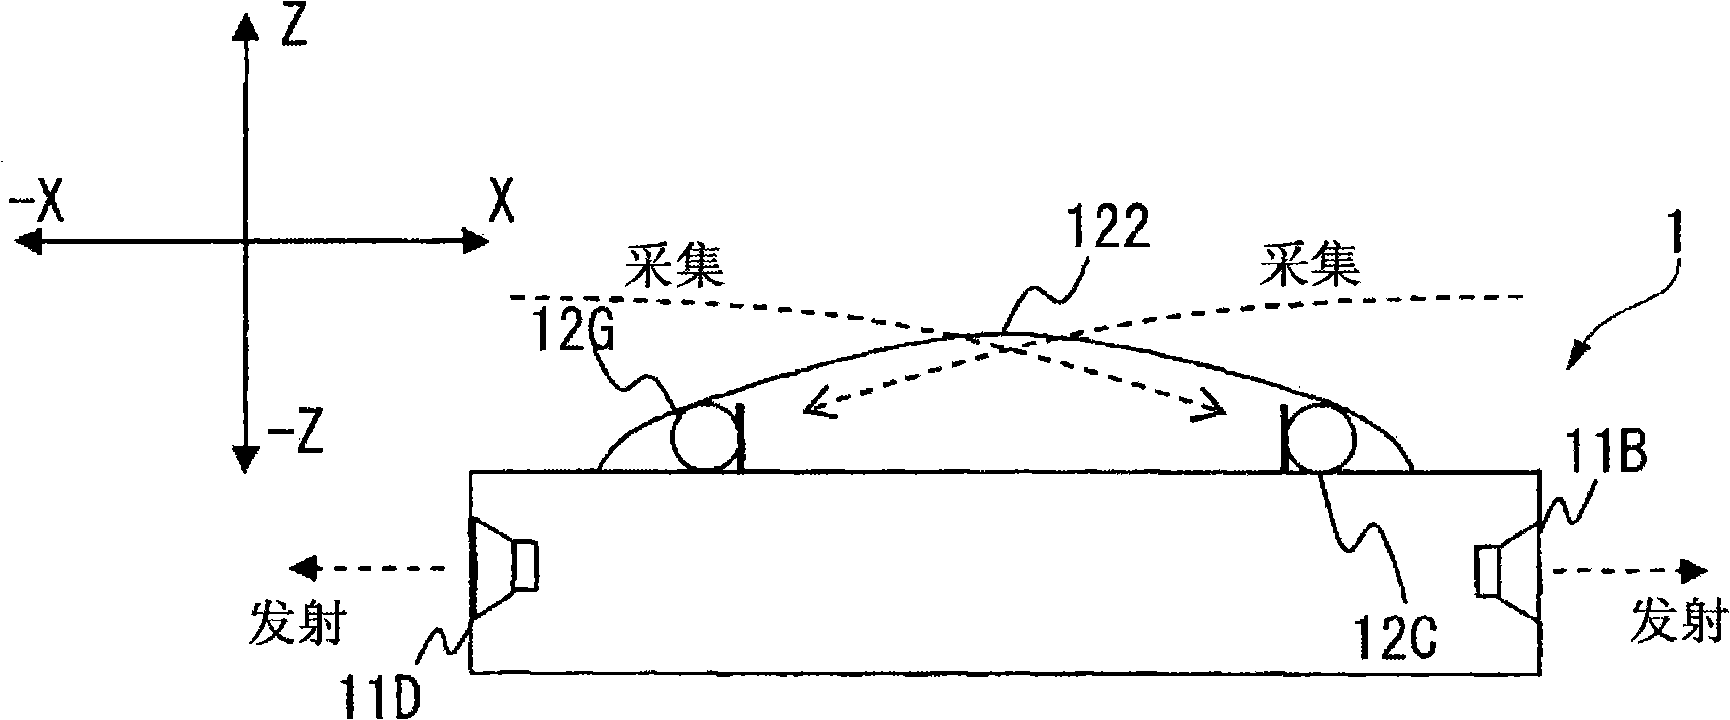 Sound emission and collection device